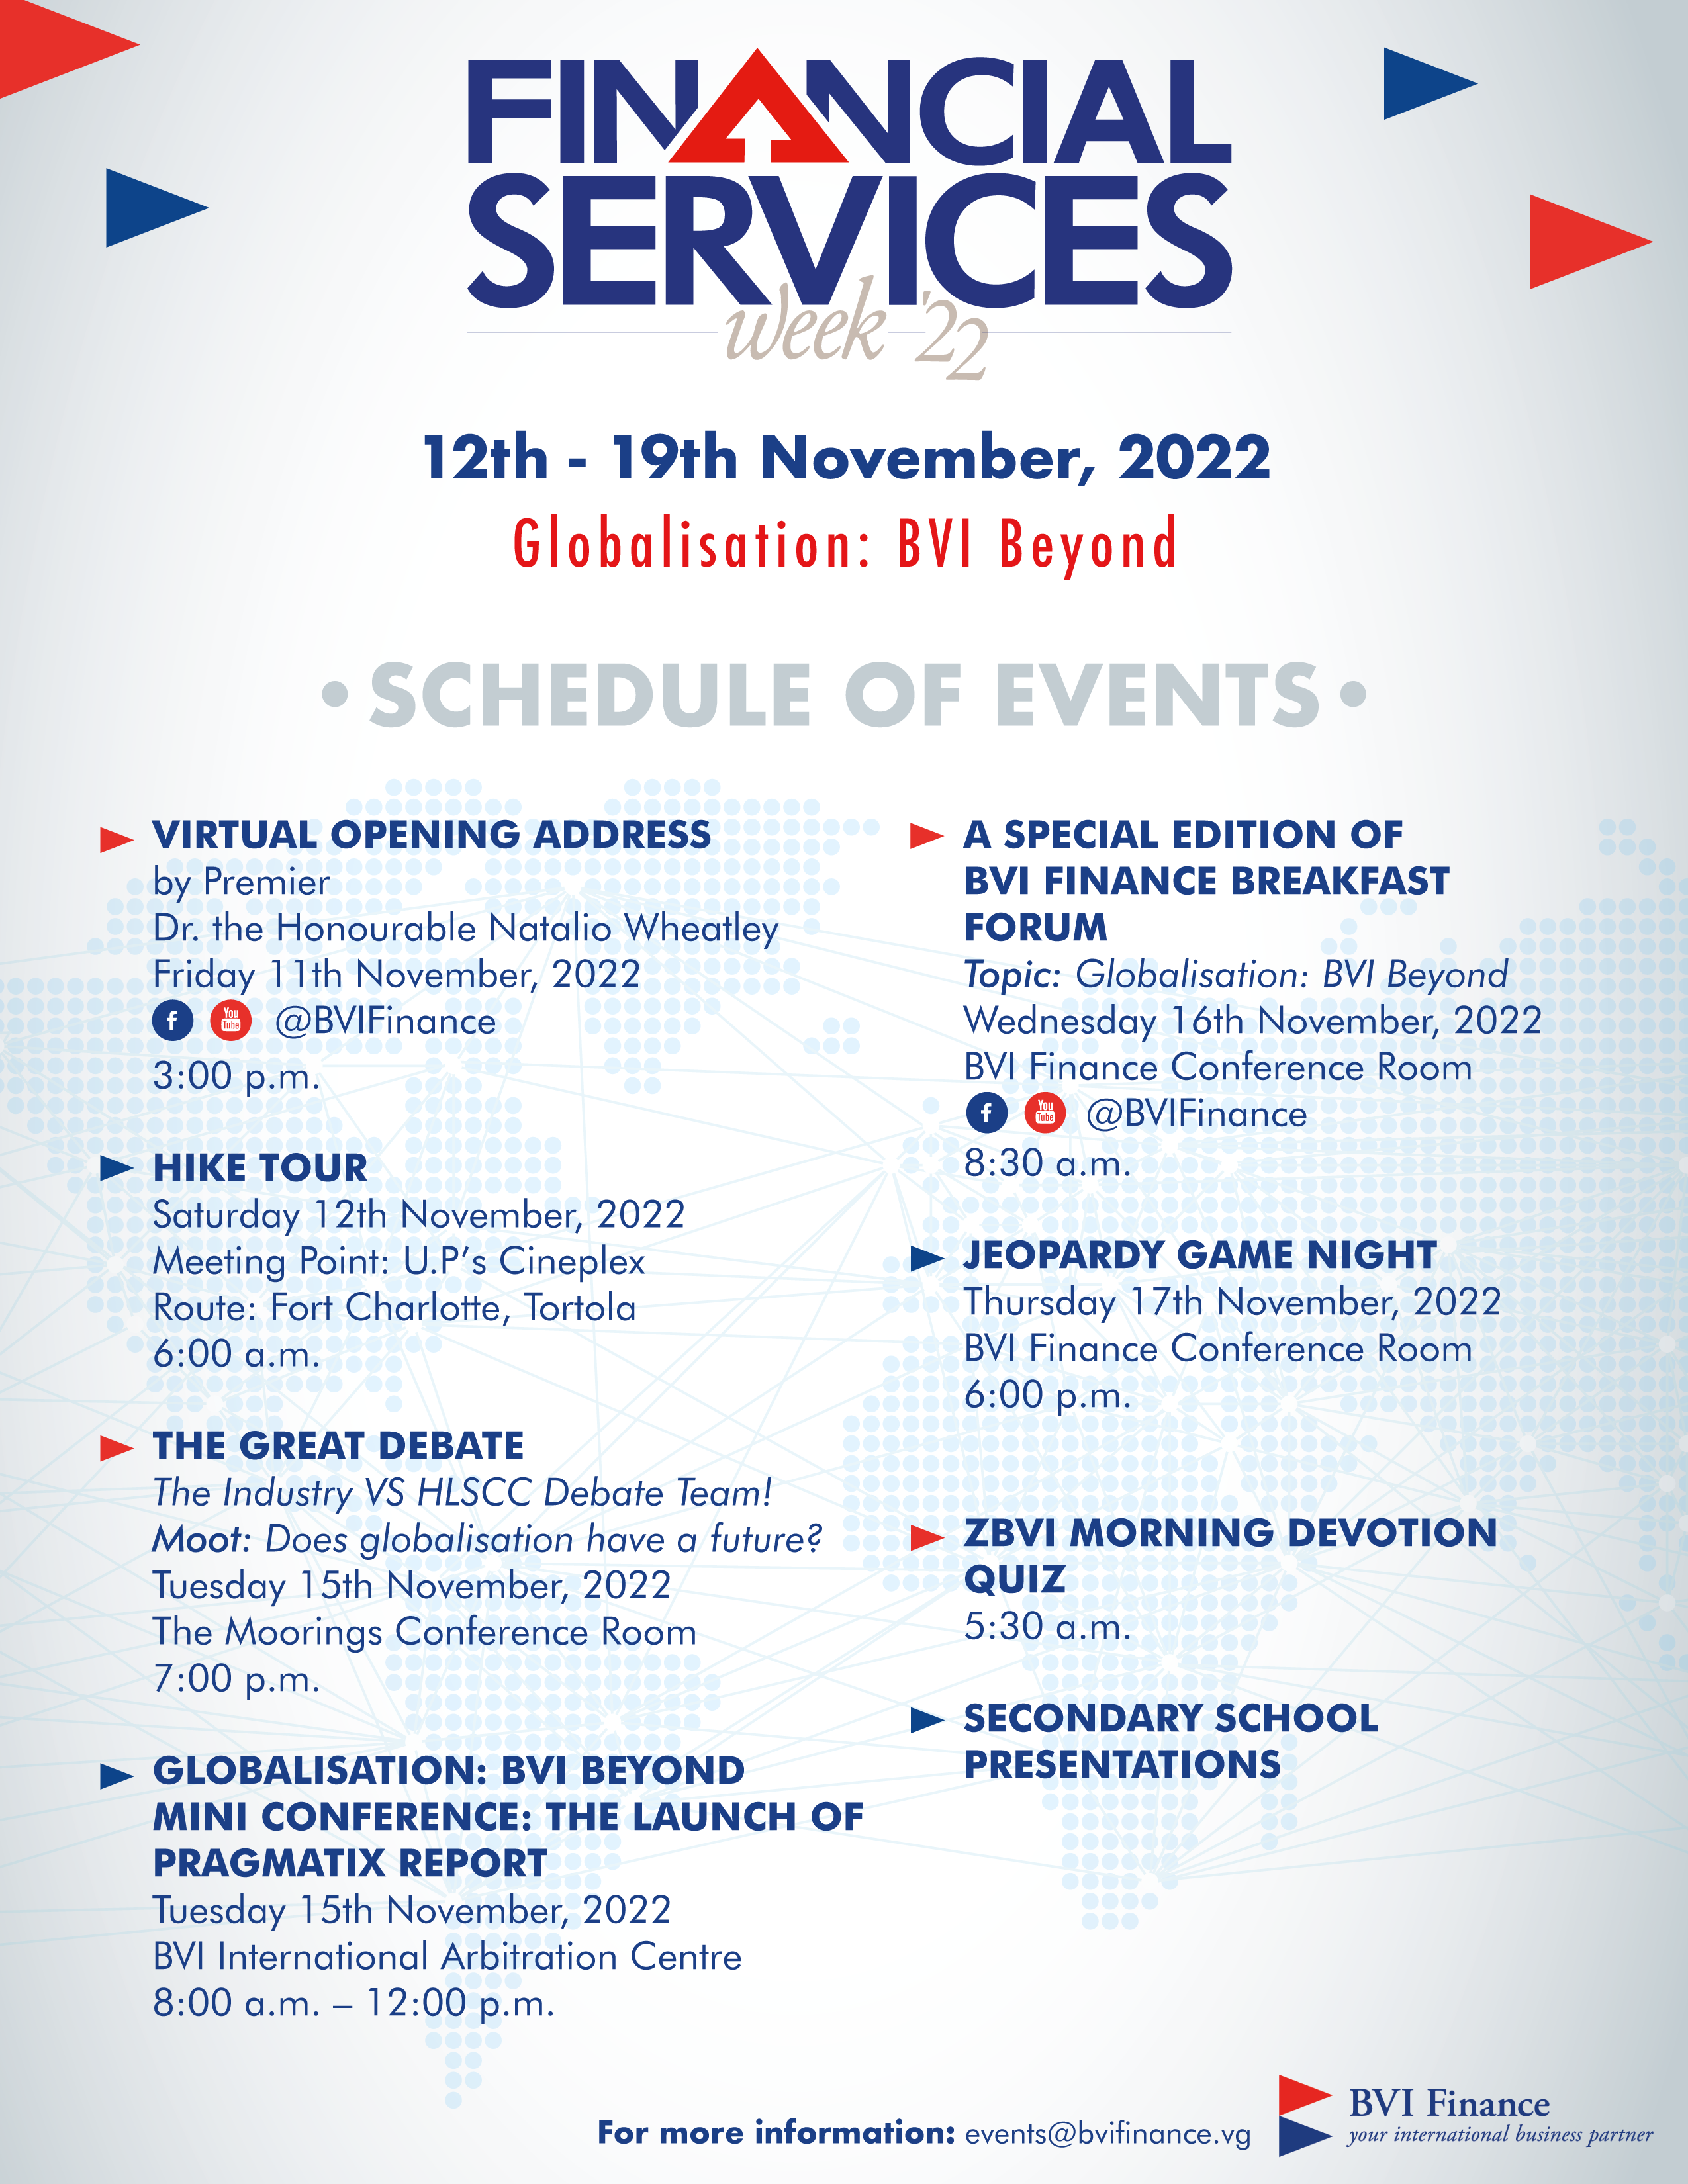 GLOBALISATION: BVI BEYOND IS THE THEME FOR FINANCIAL SERVICES WEEK 2022, NOVEMBER 12-19